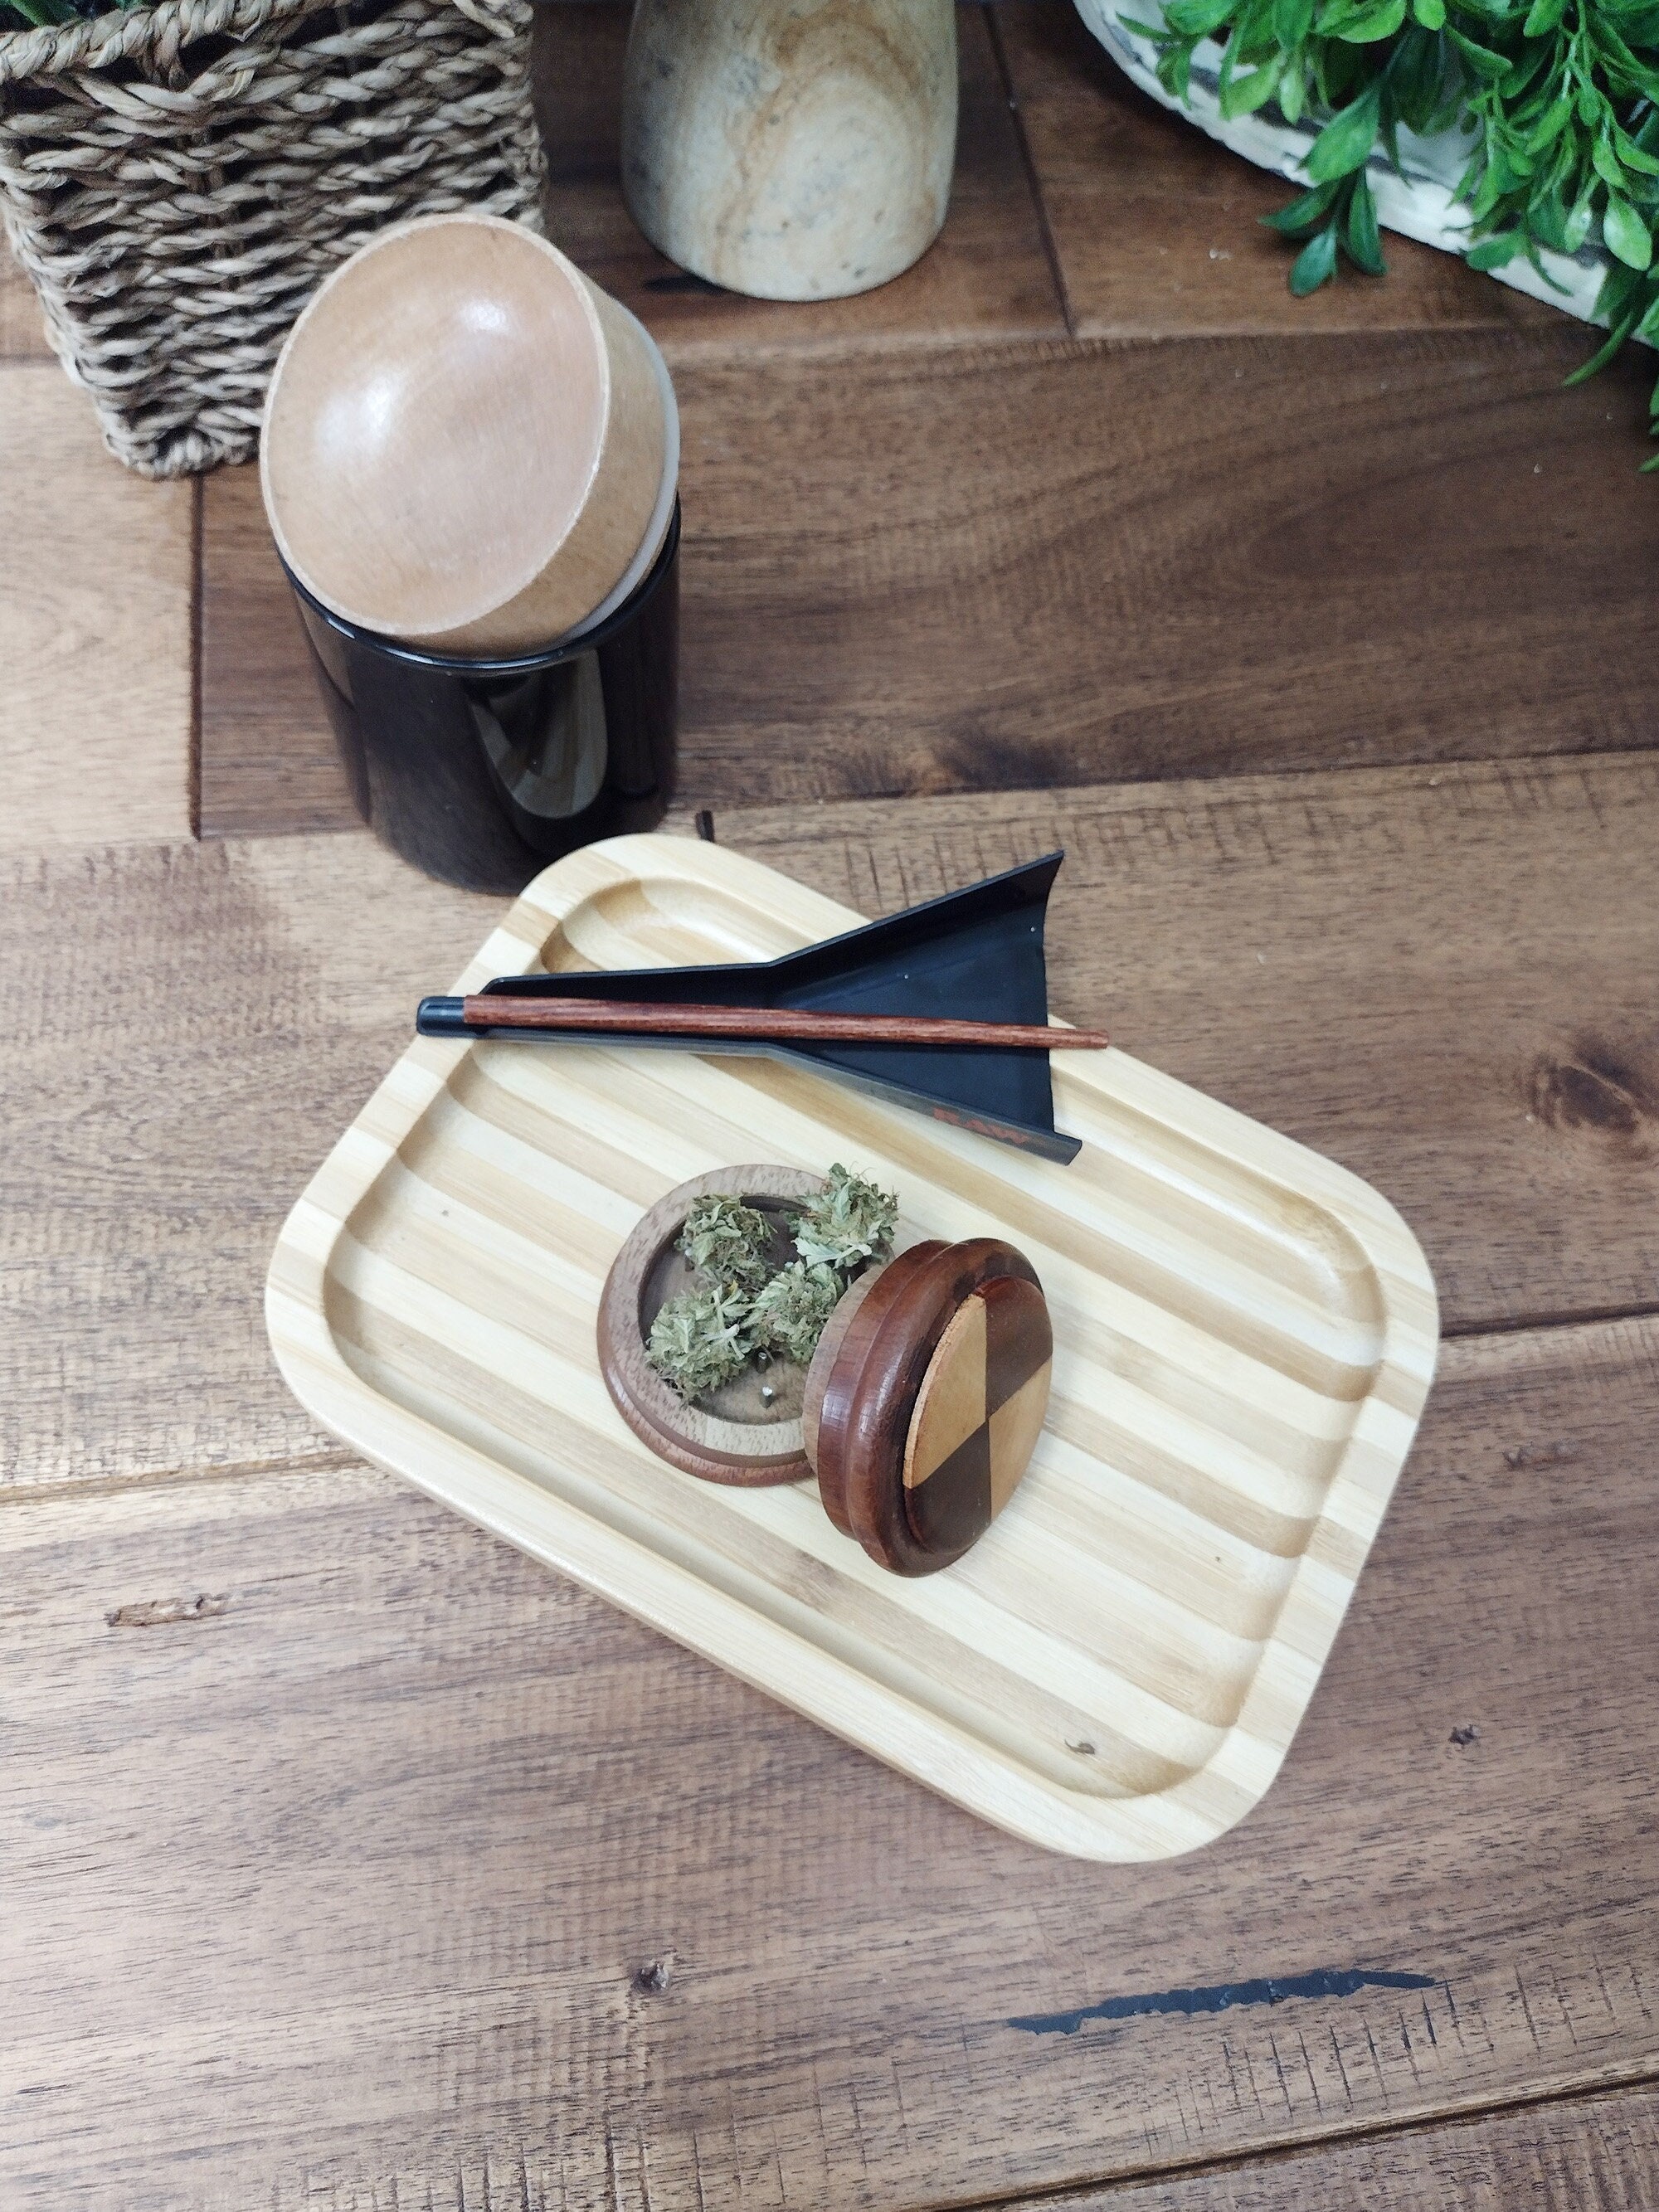 Oval Bamboo Rolling Tray for Weed Smoking 8*17cm - Siliclab